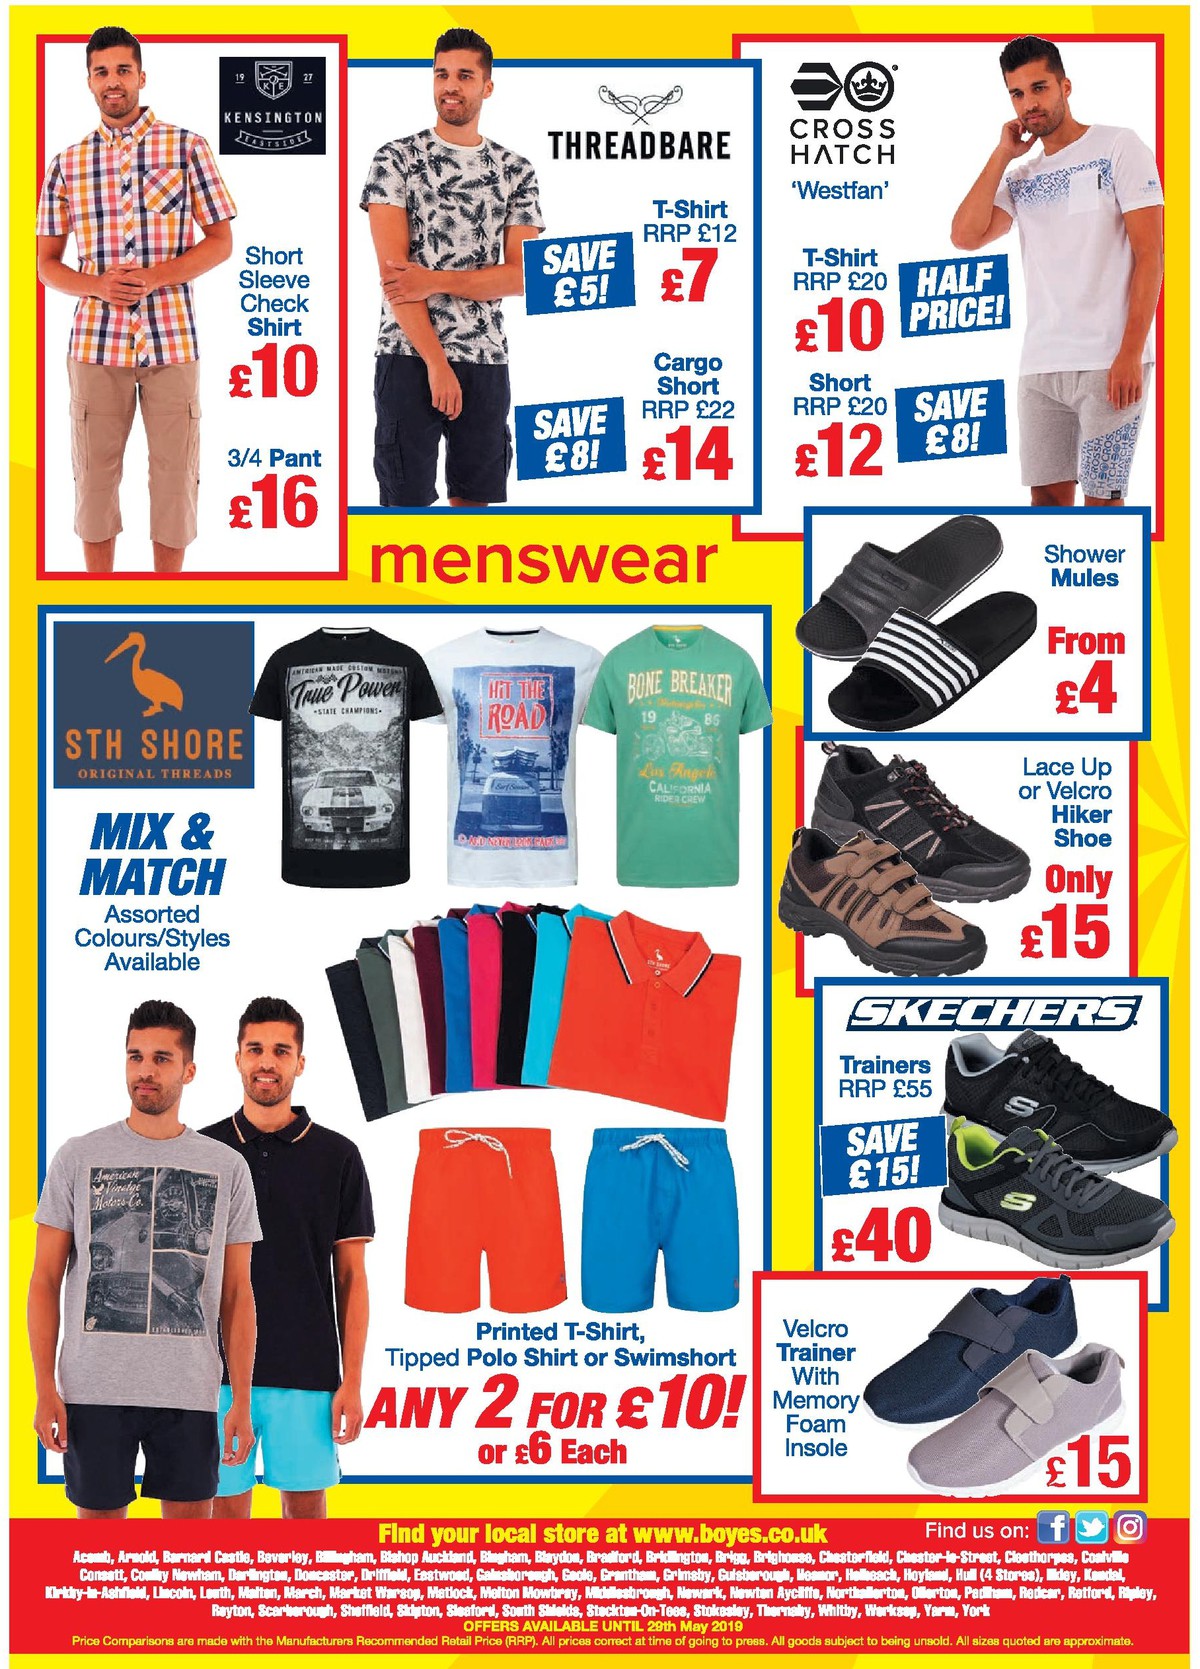 Boyes Offers from 1 May